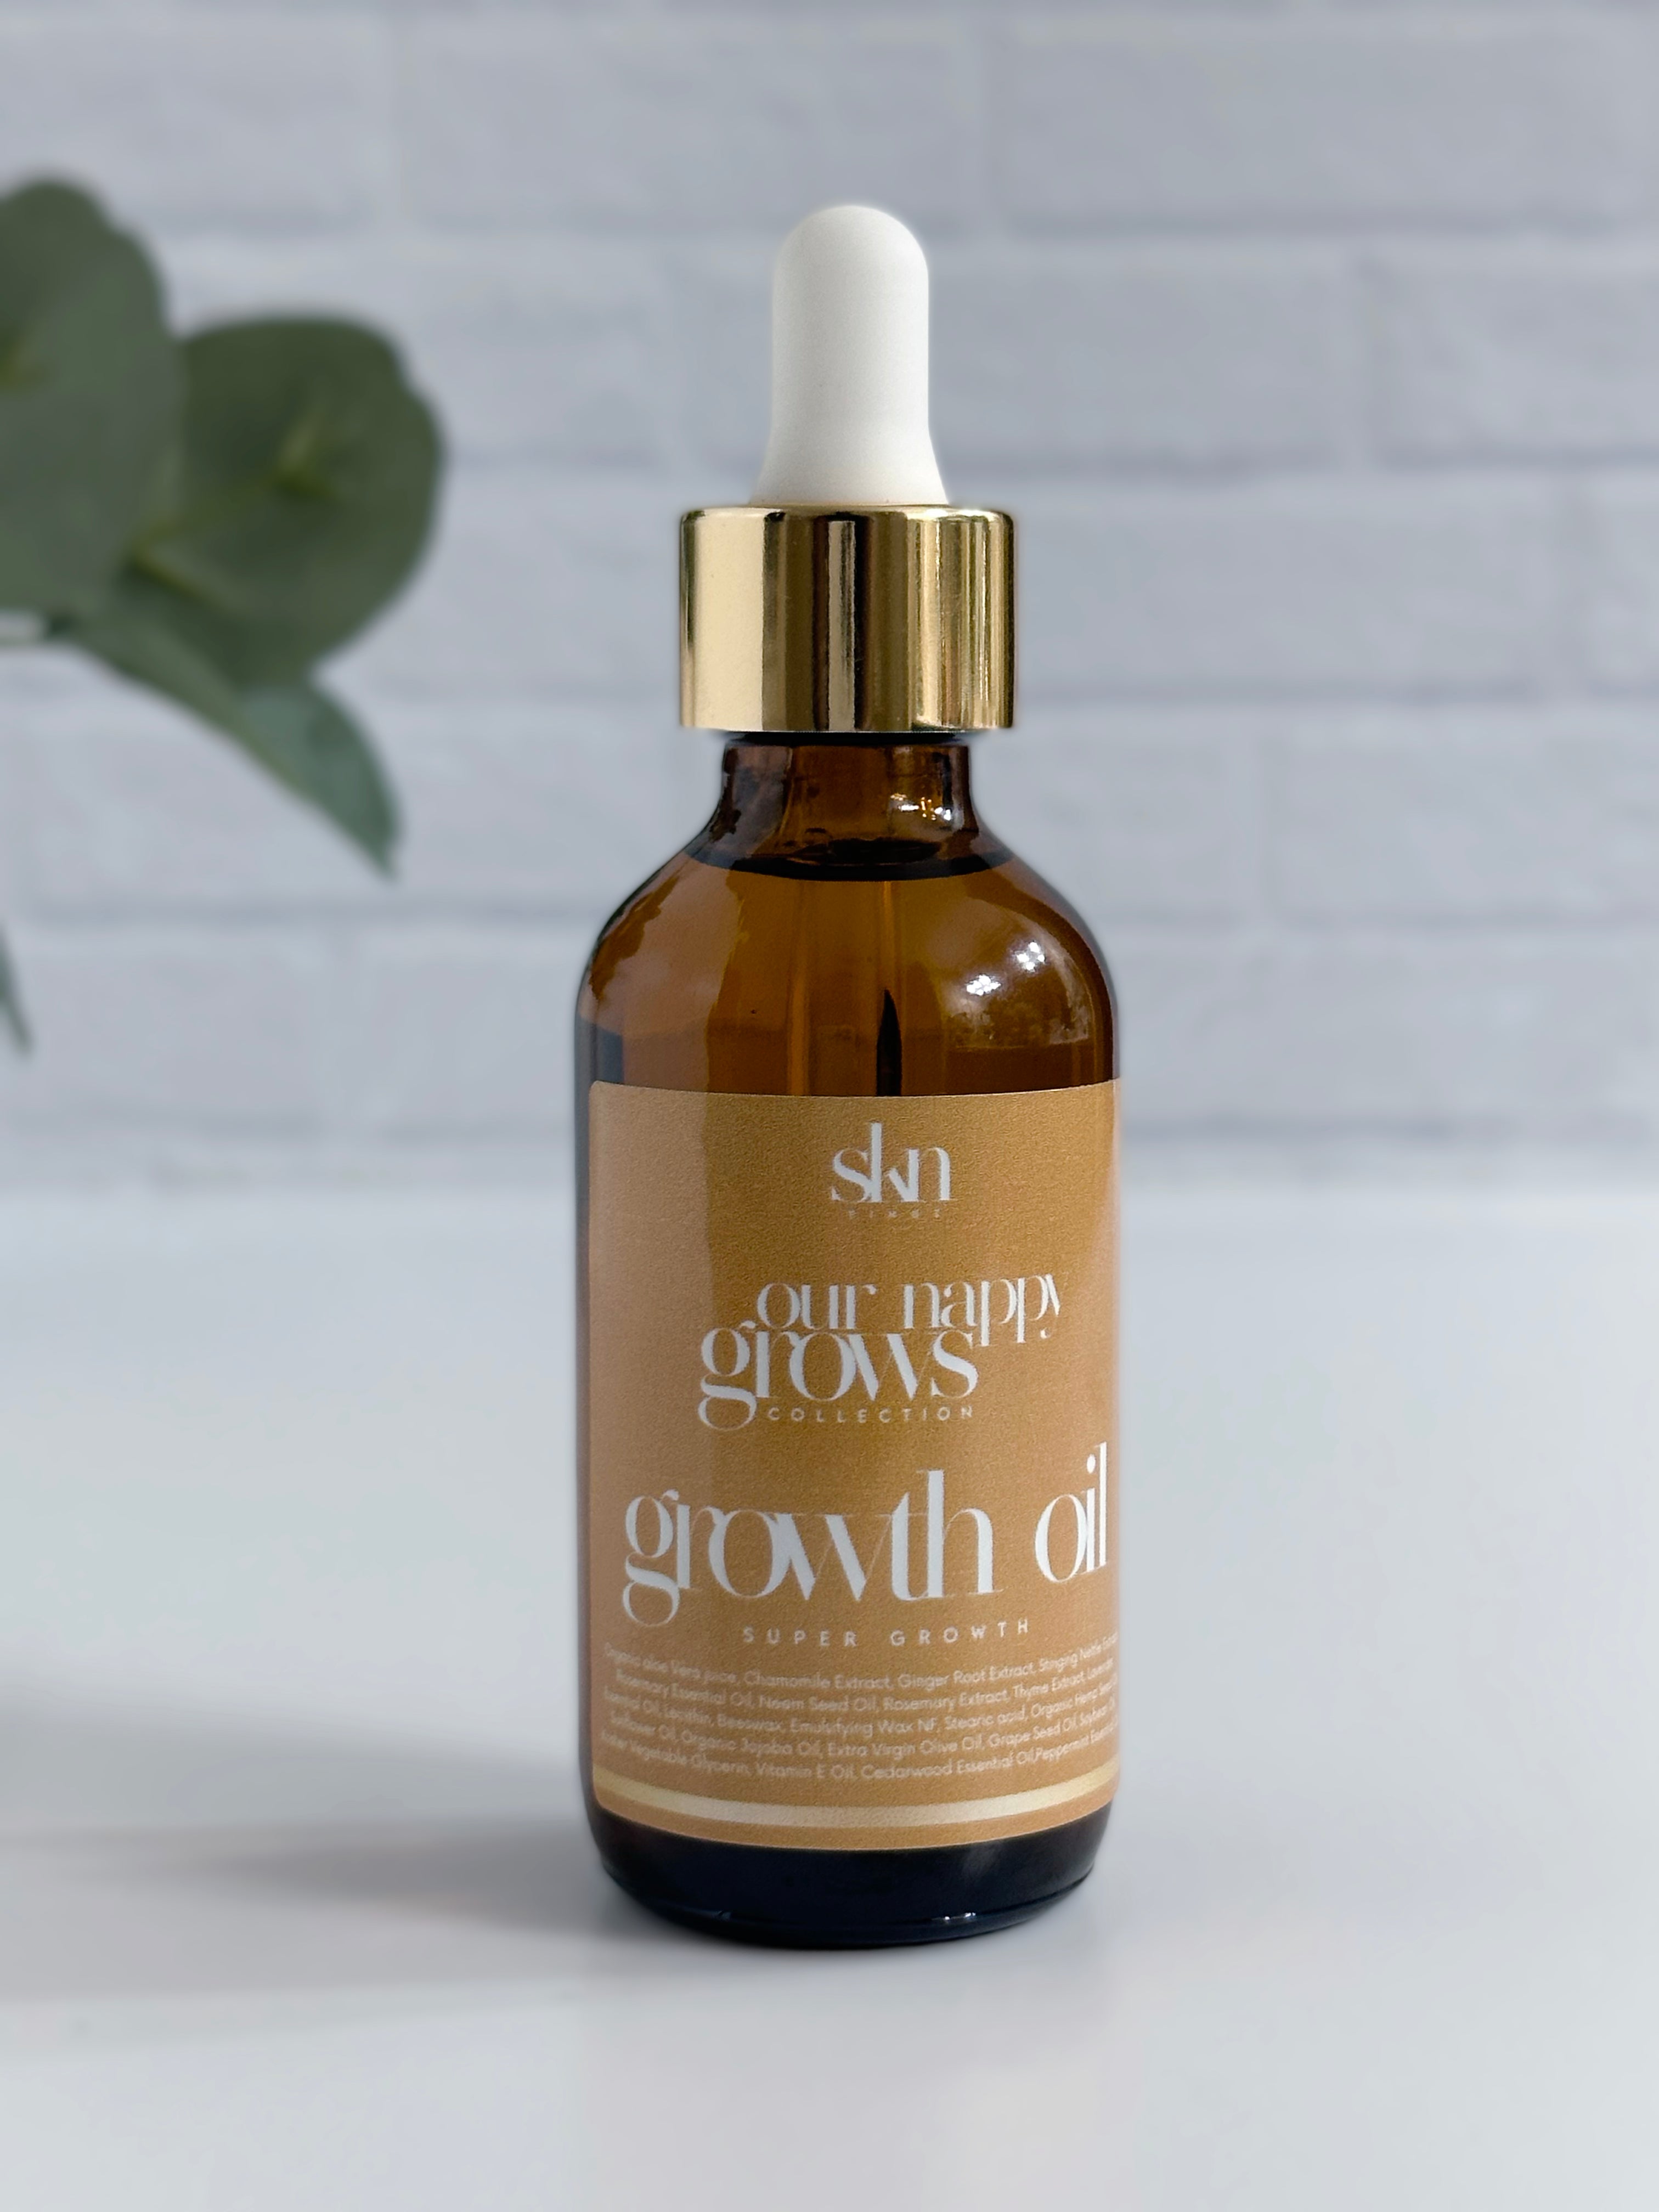 Our Nappy Grows Extra Strength Stimulating Growth Hair Oil